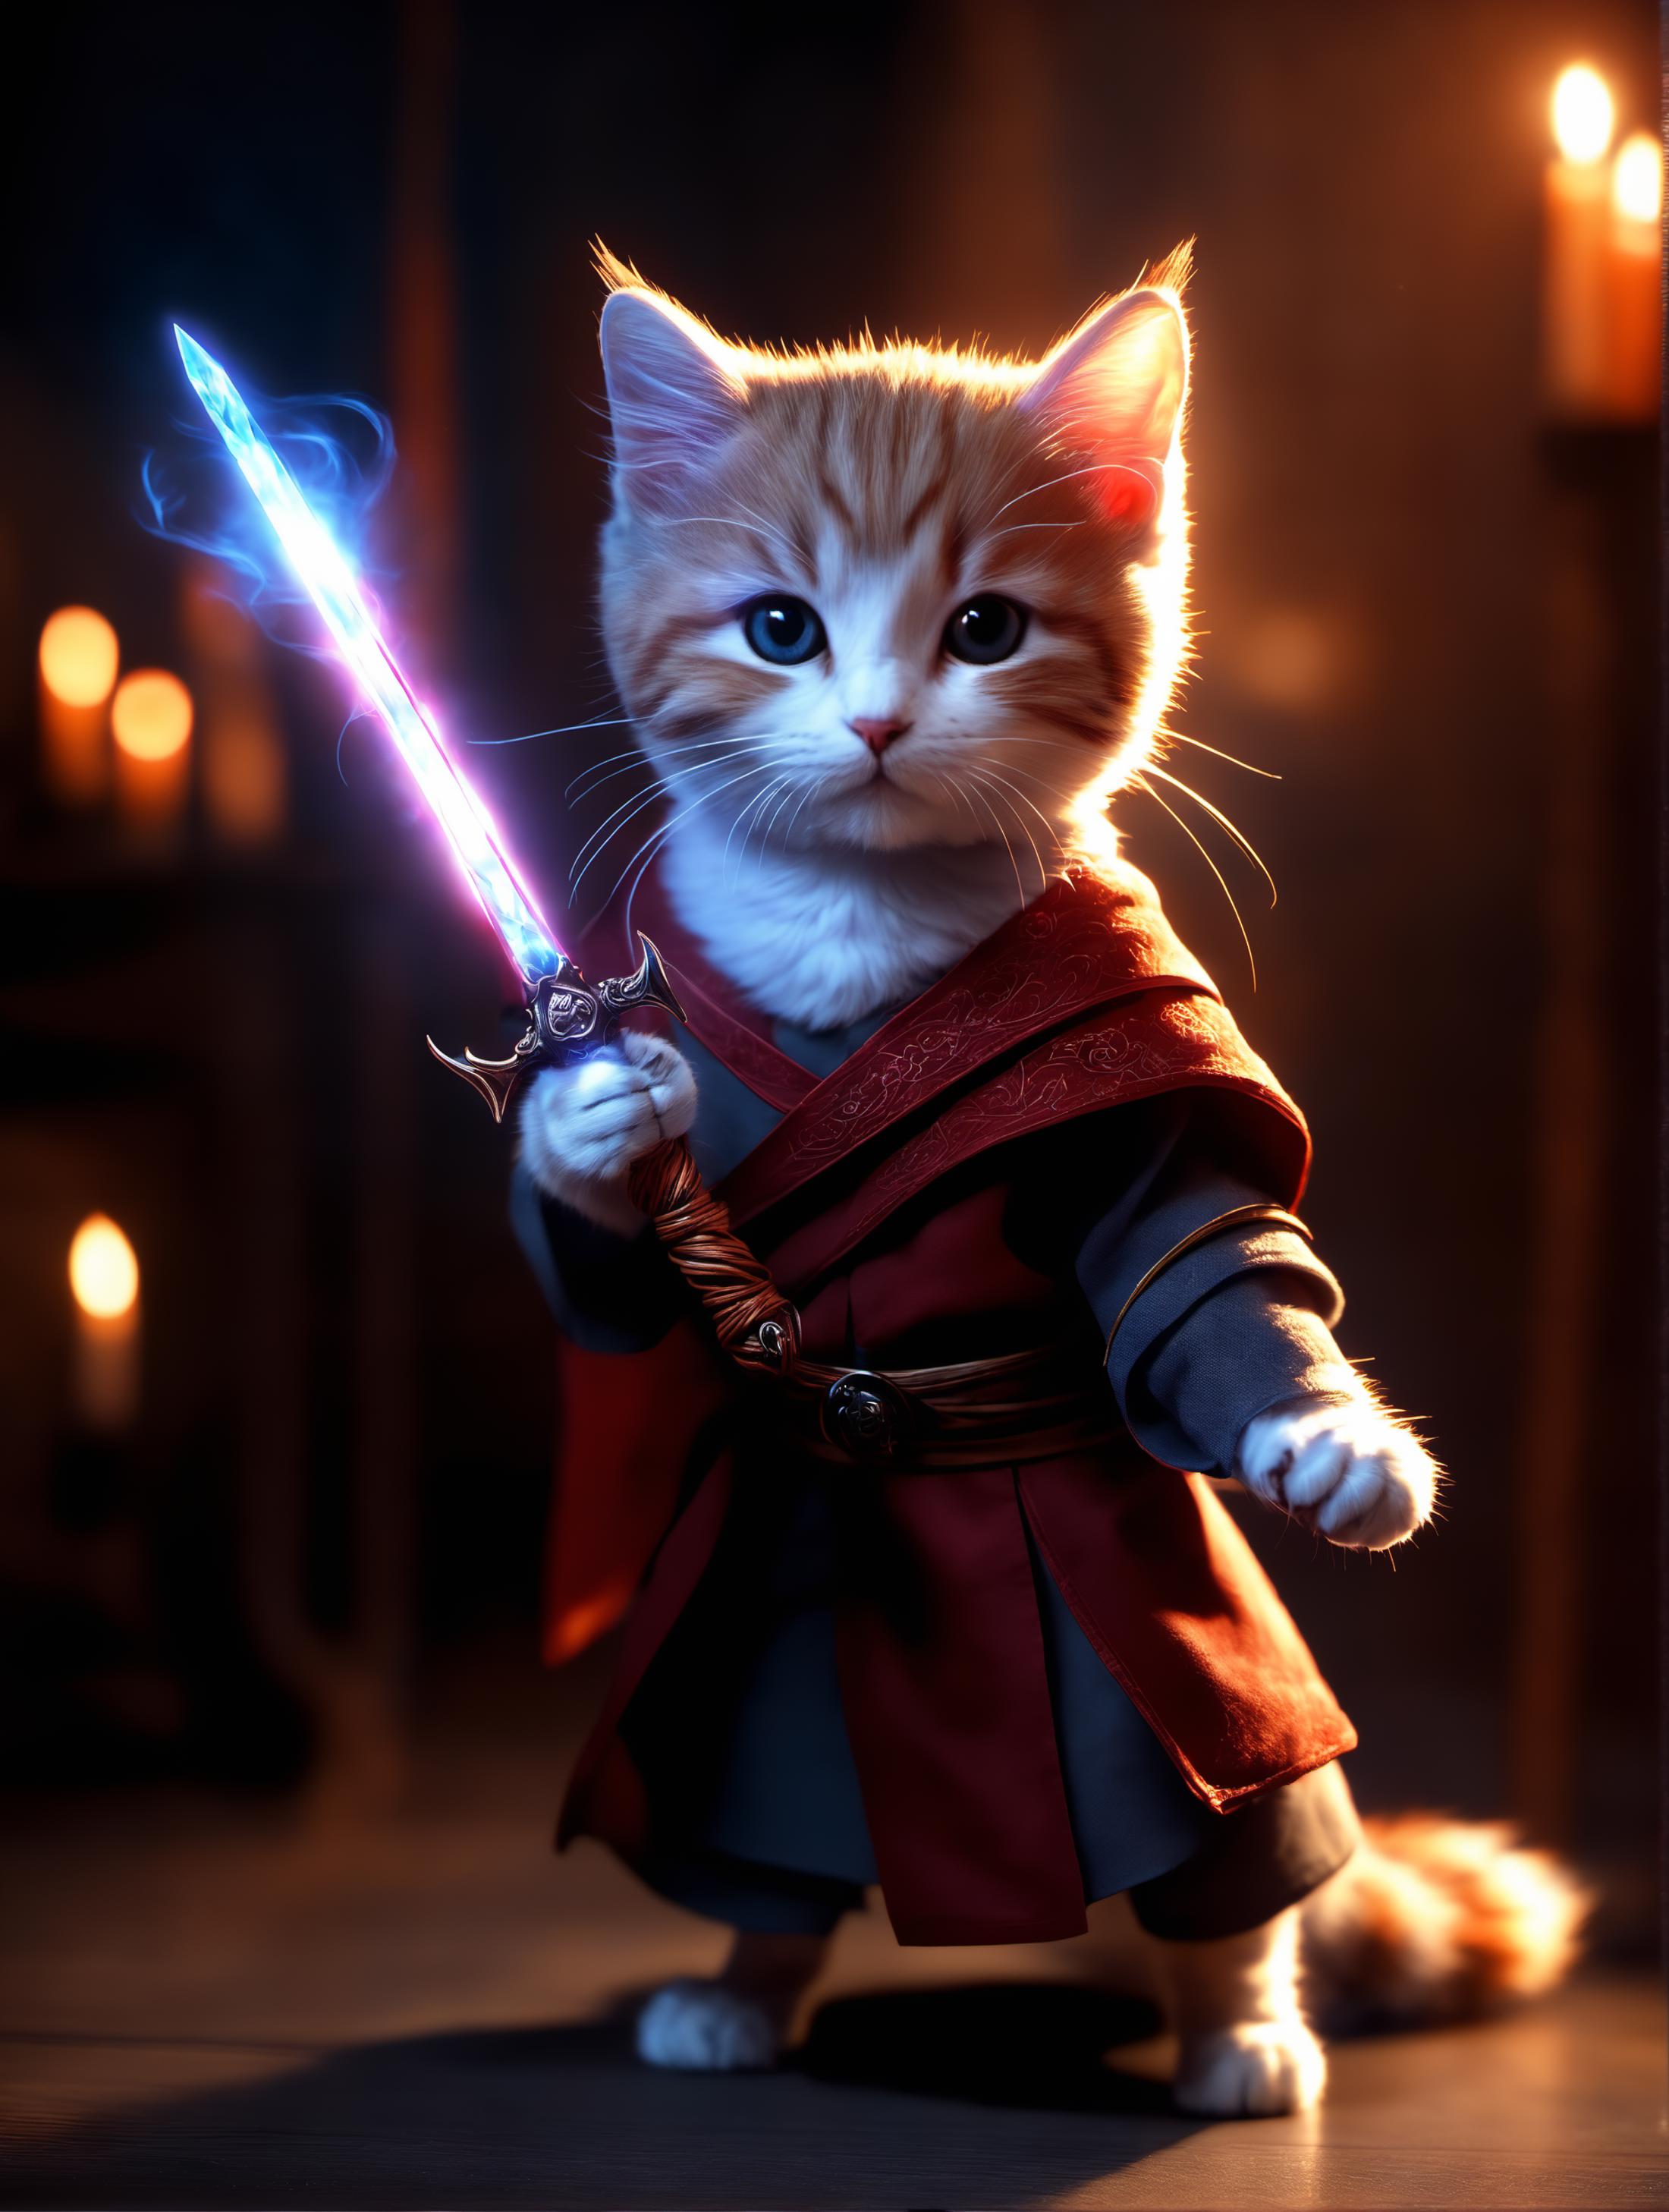 A tiny kitten holding a sword in a red robe.